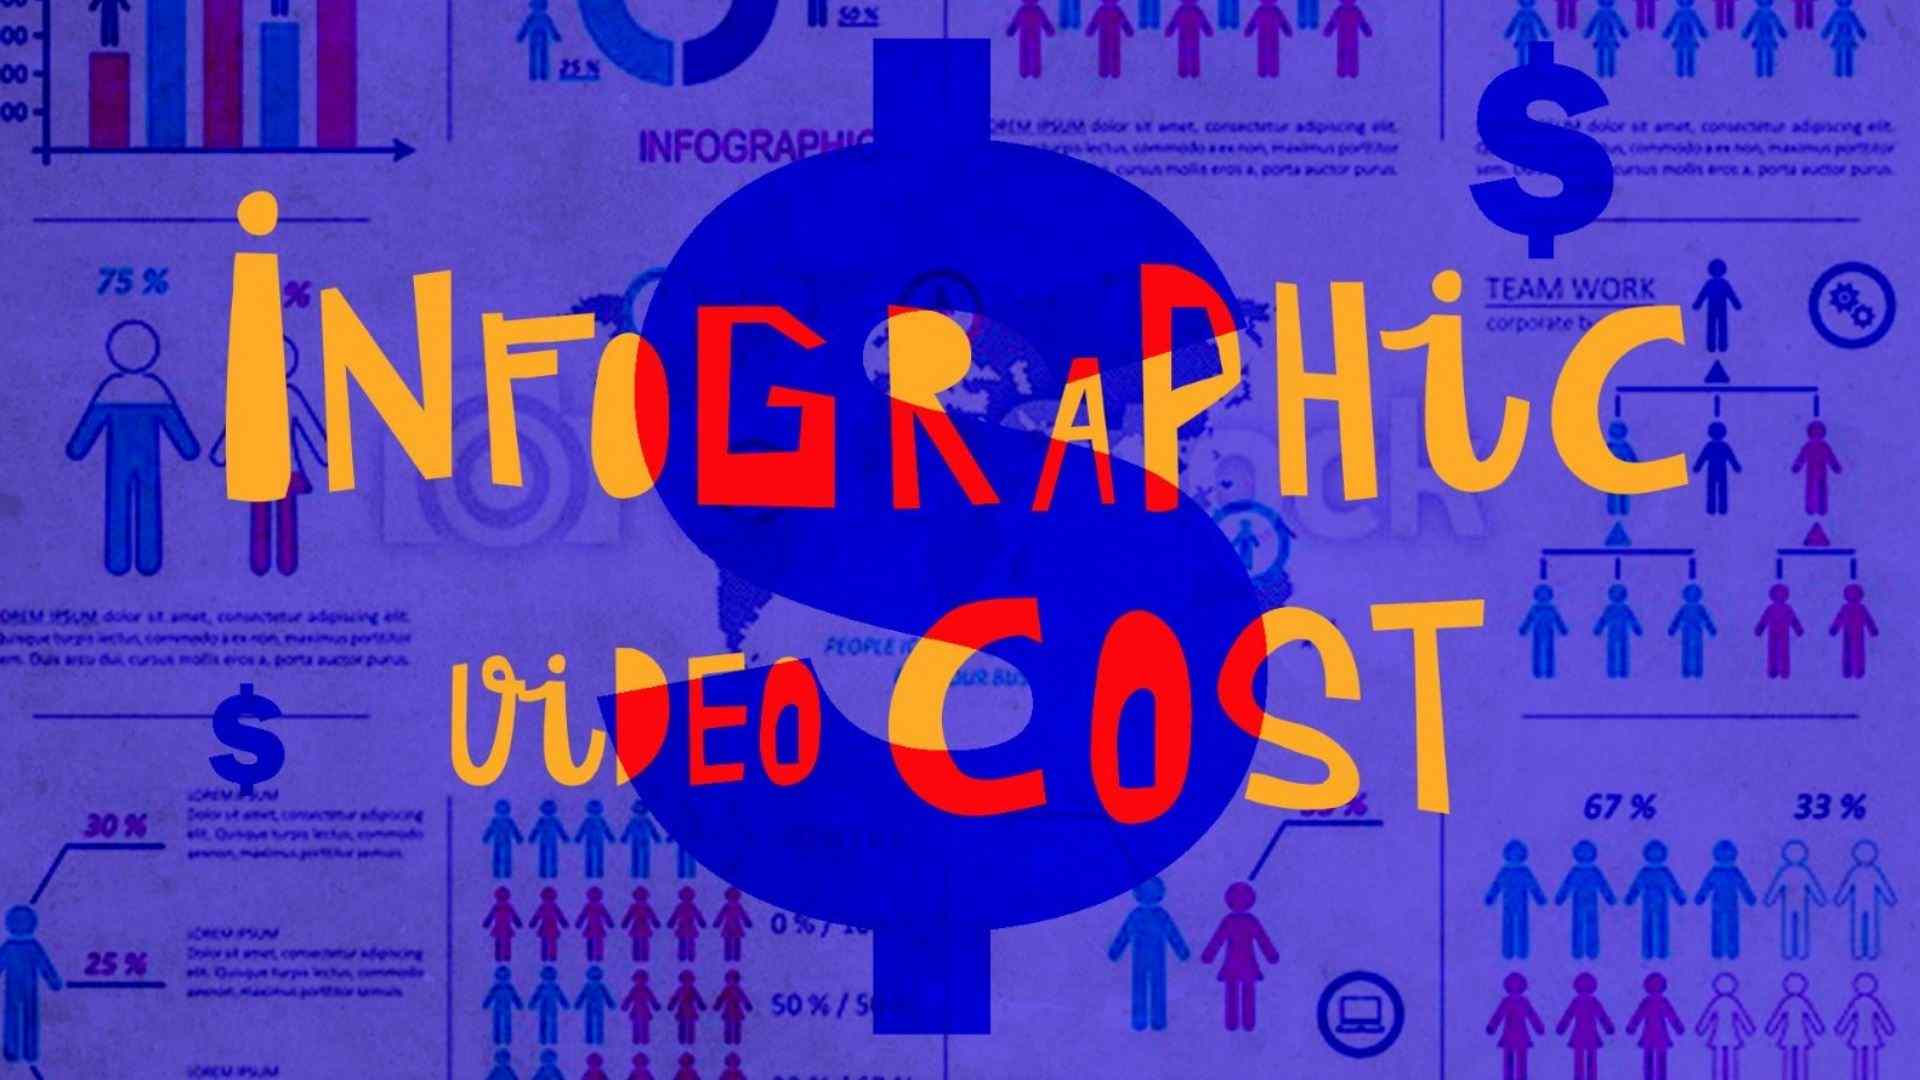 Infographic-Video-Cost